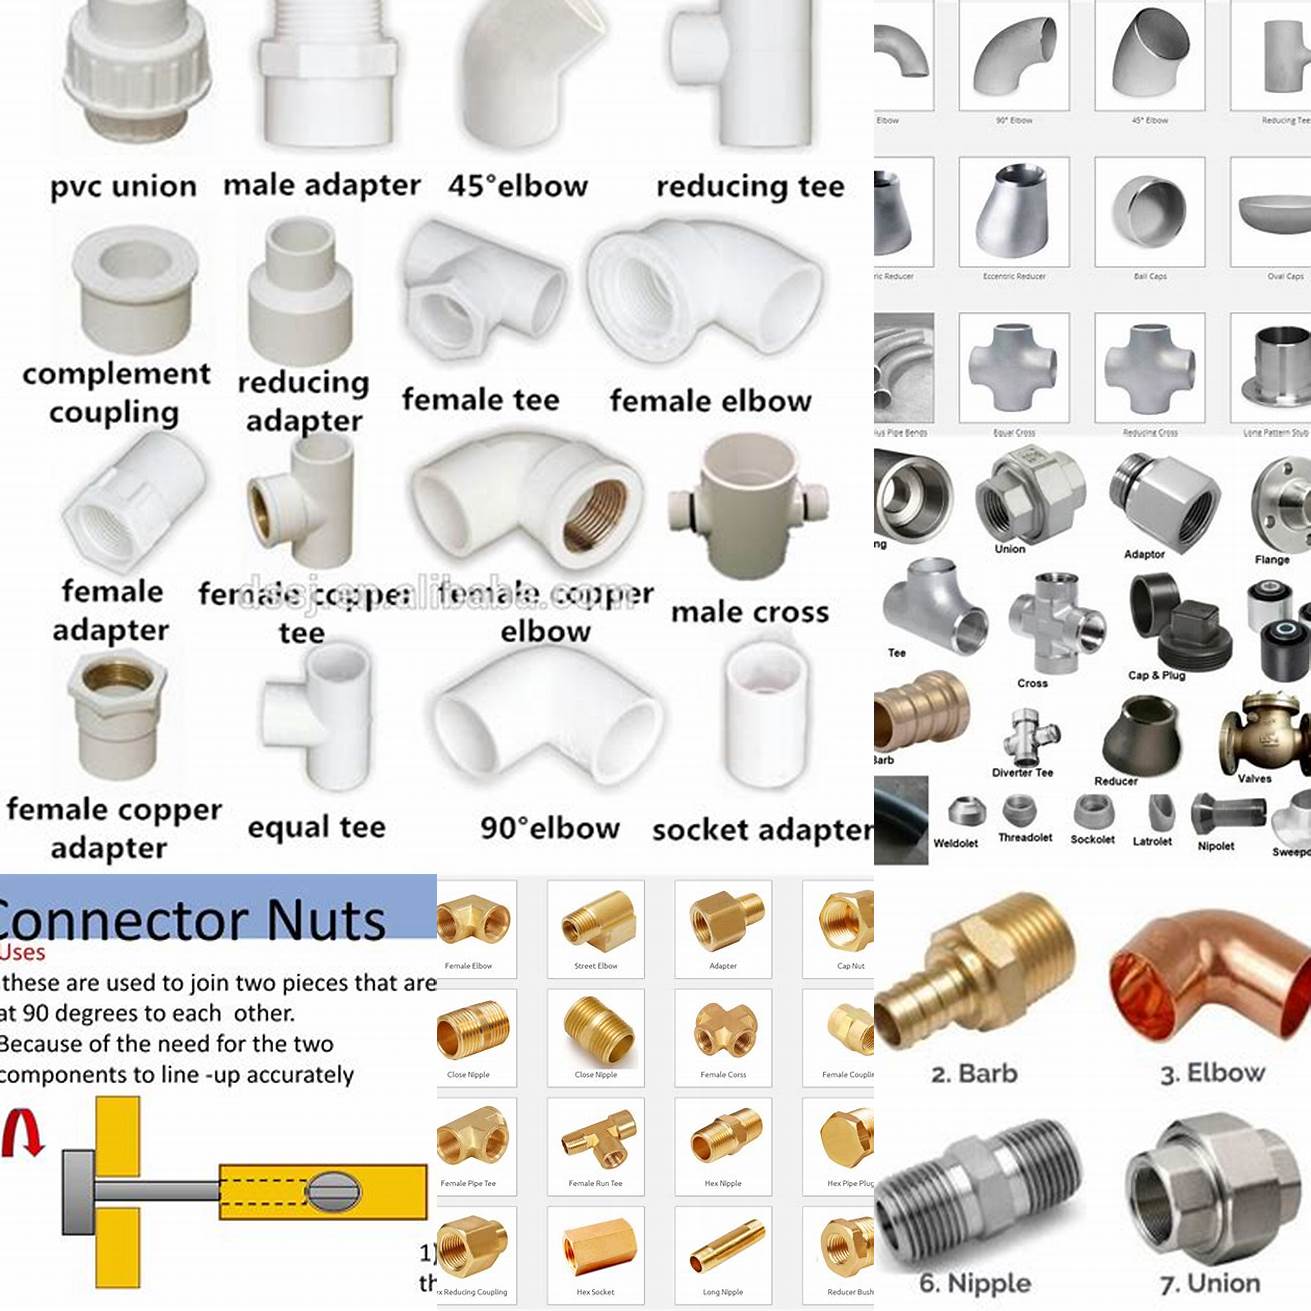 3 Comparison between different types of fittings